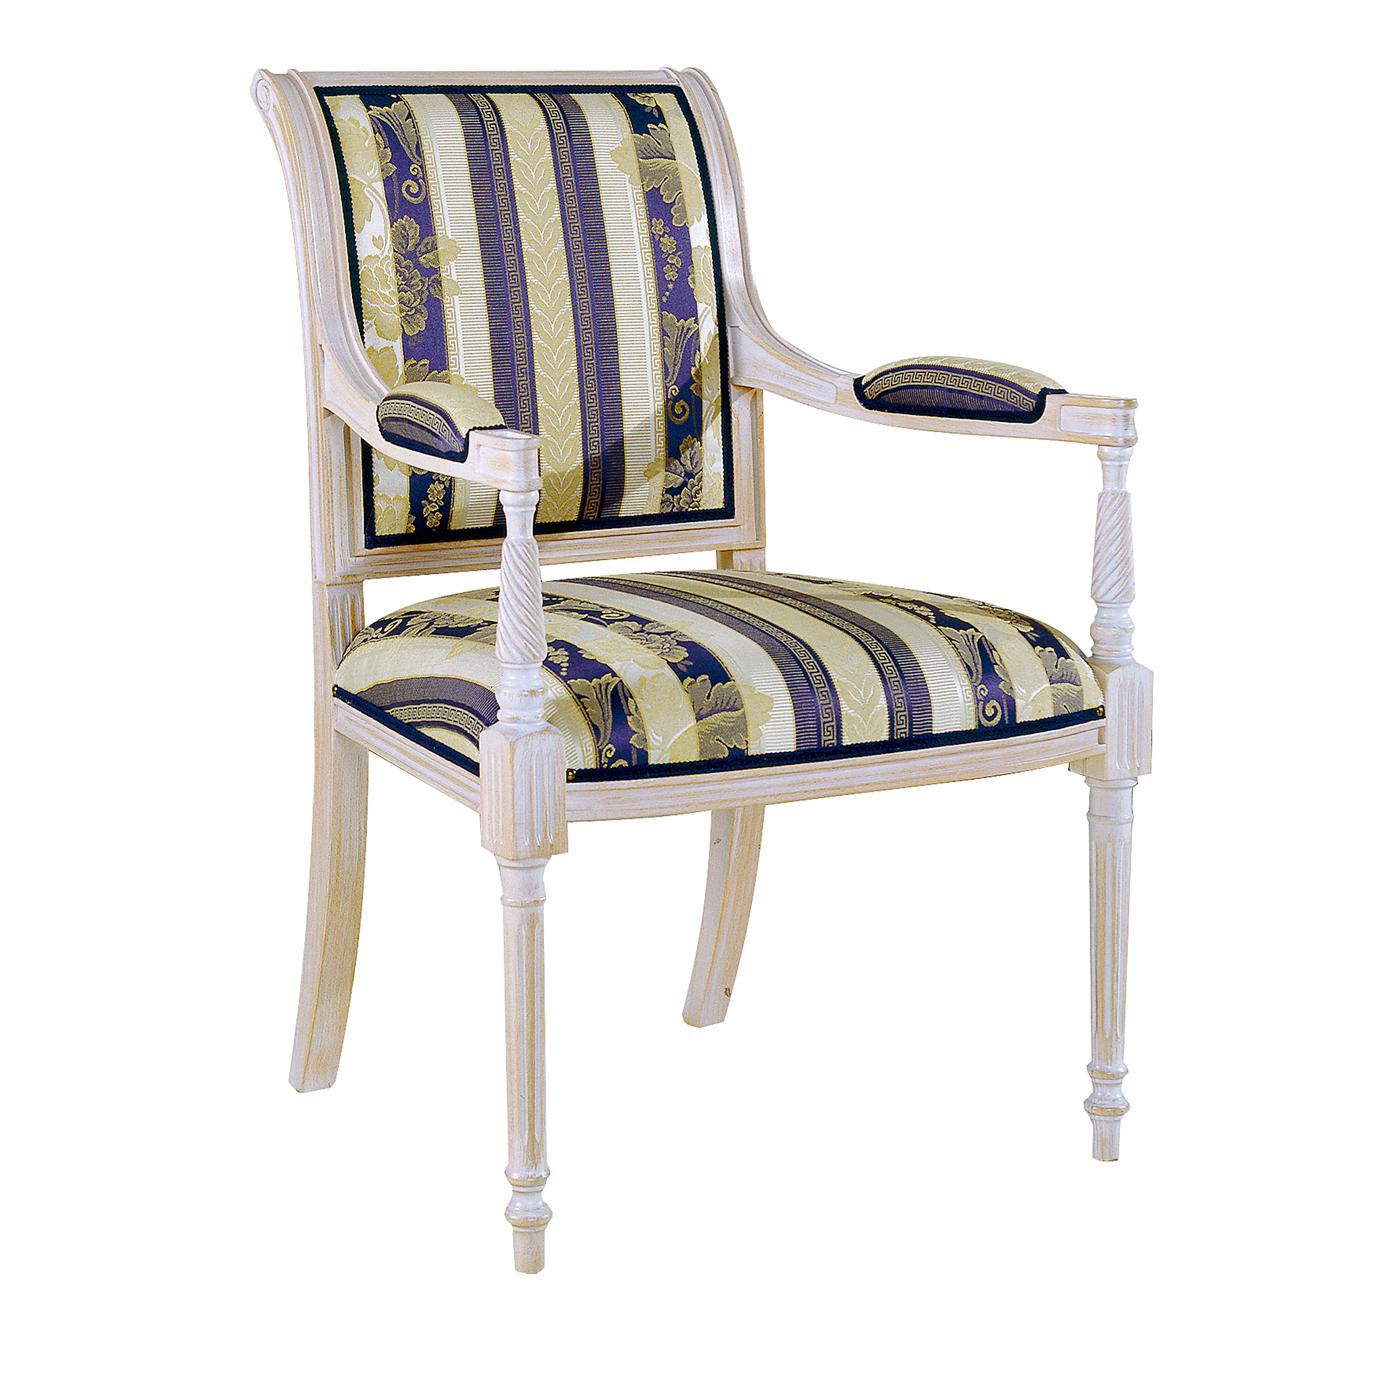 A luxury touch for living or dining rooms: this Contemporary table chair features an elegant antique ivory-white finish wooden structure. The seat, backrest and armrests are padded and upholstered with a striped fabric in white and blue tones.